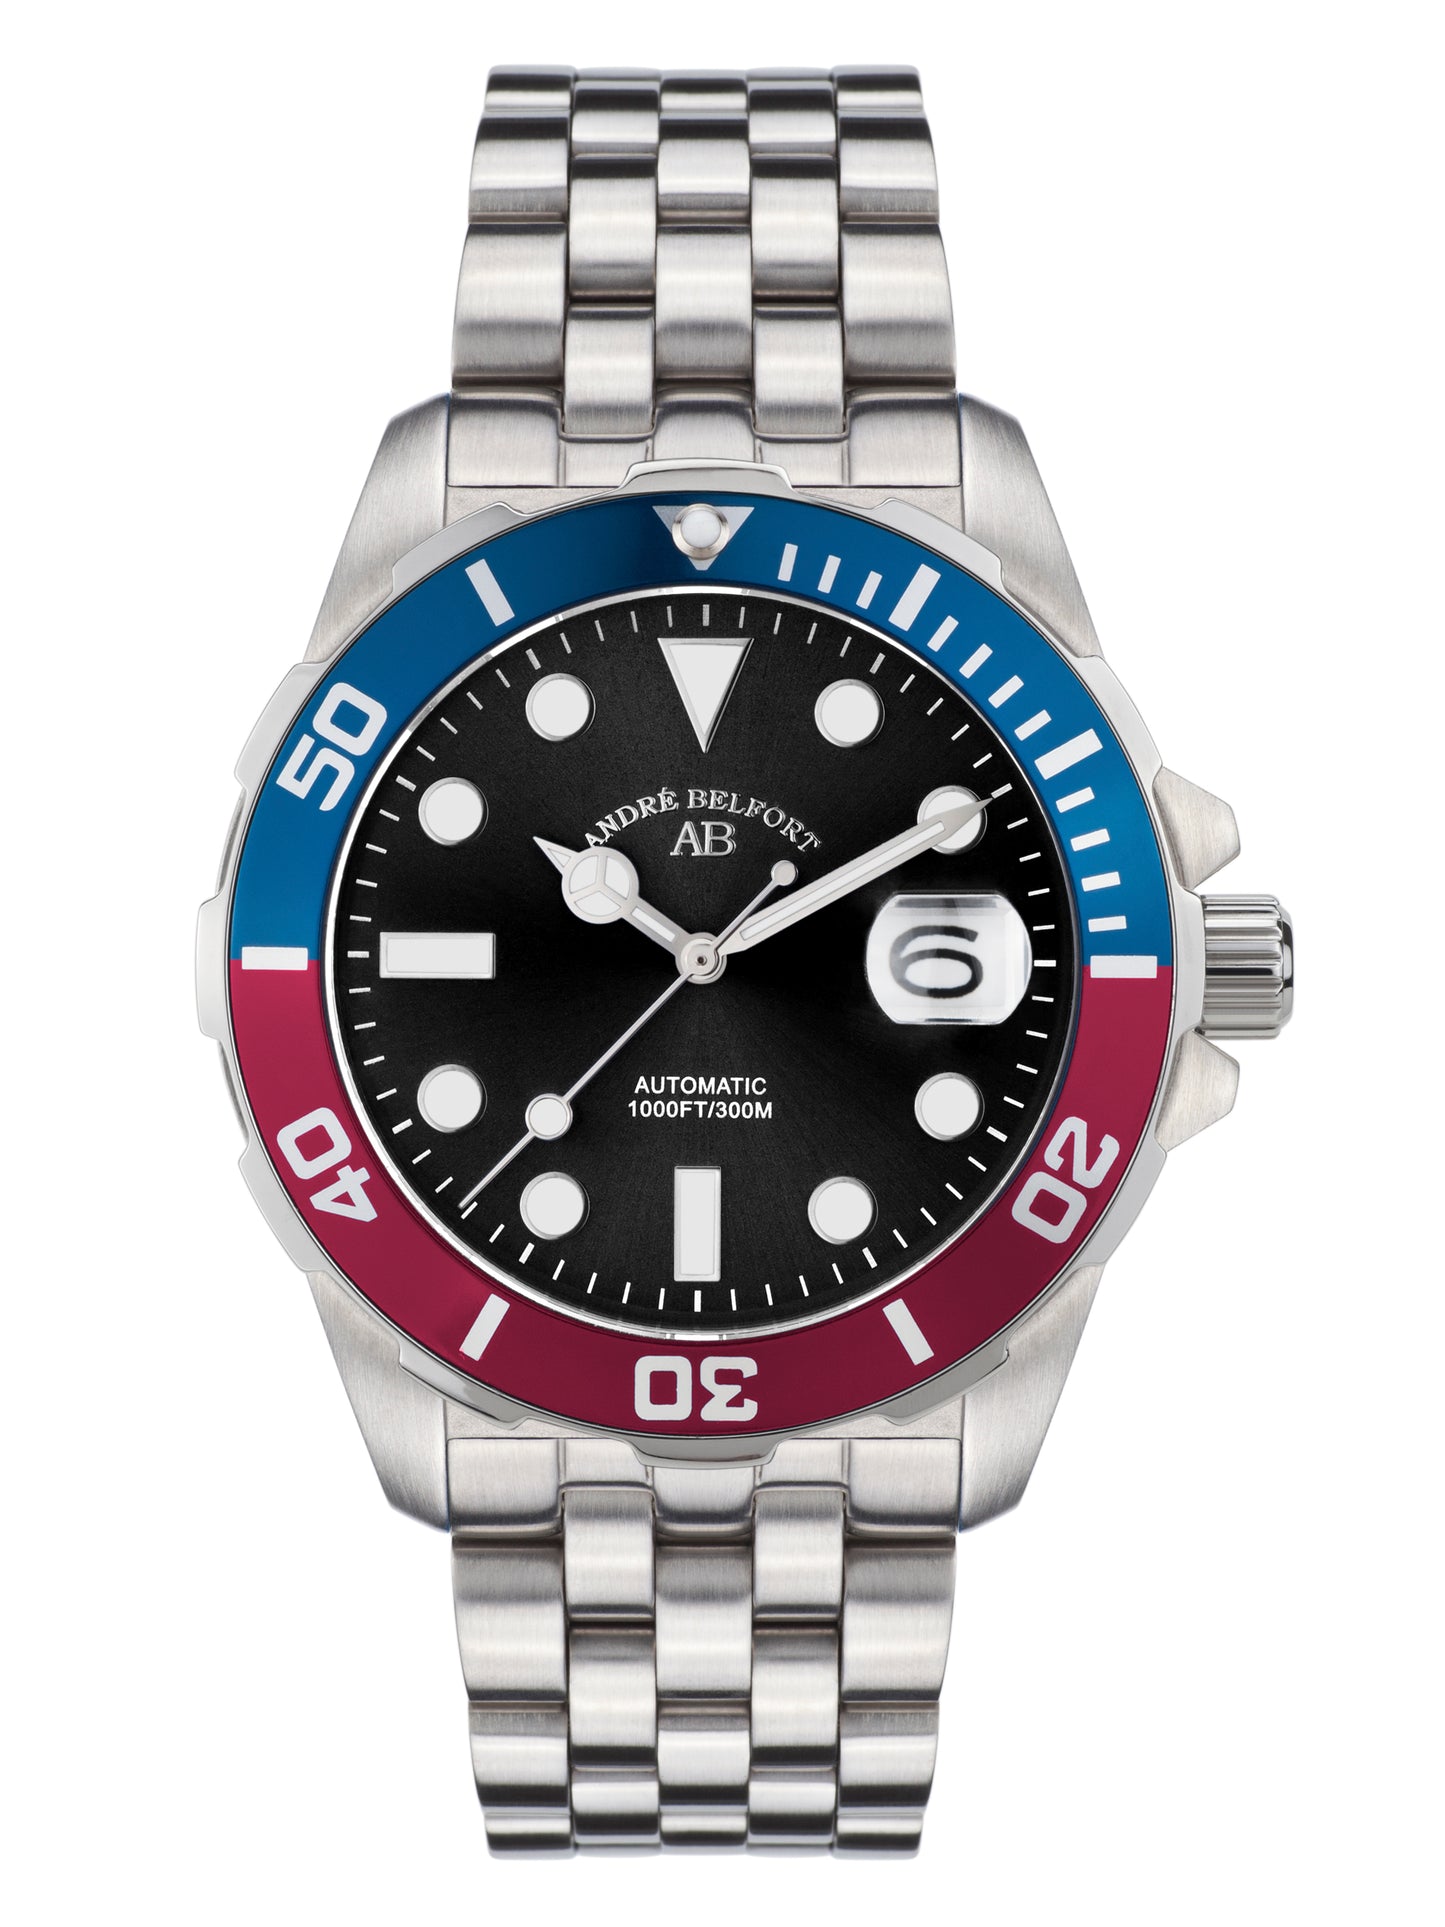 Automatic watches — Sous les mers — André Belfort — steel red-blue